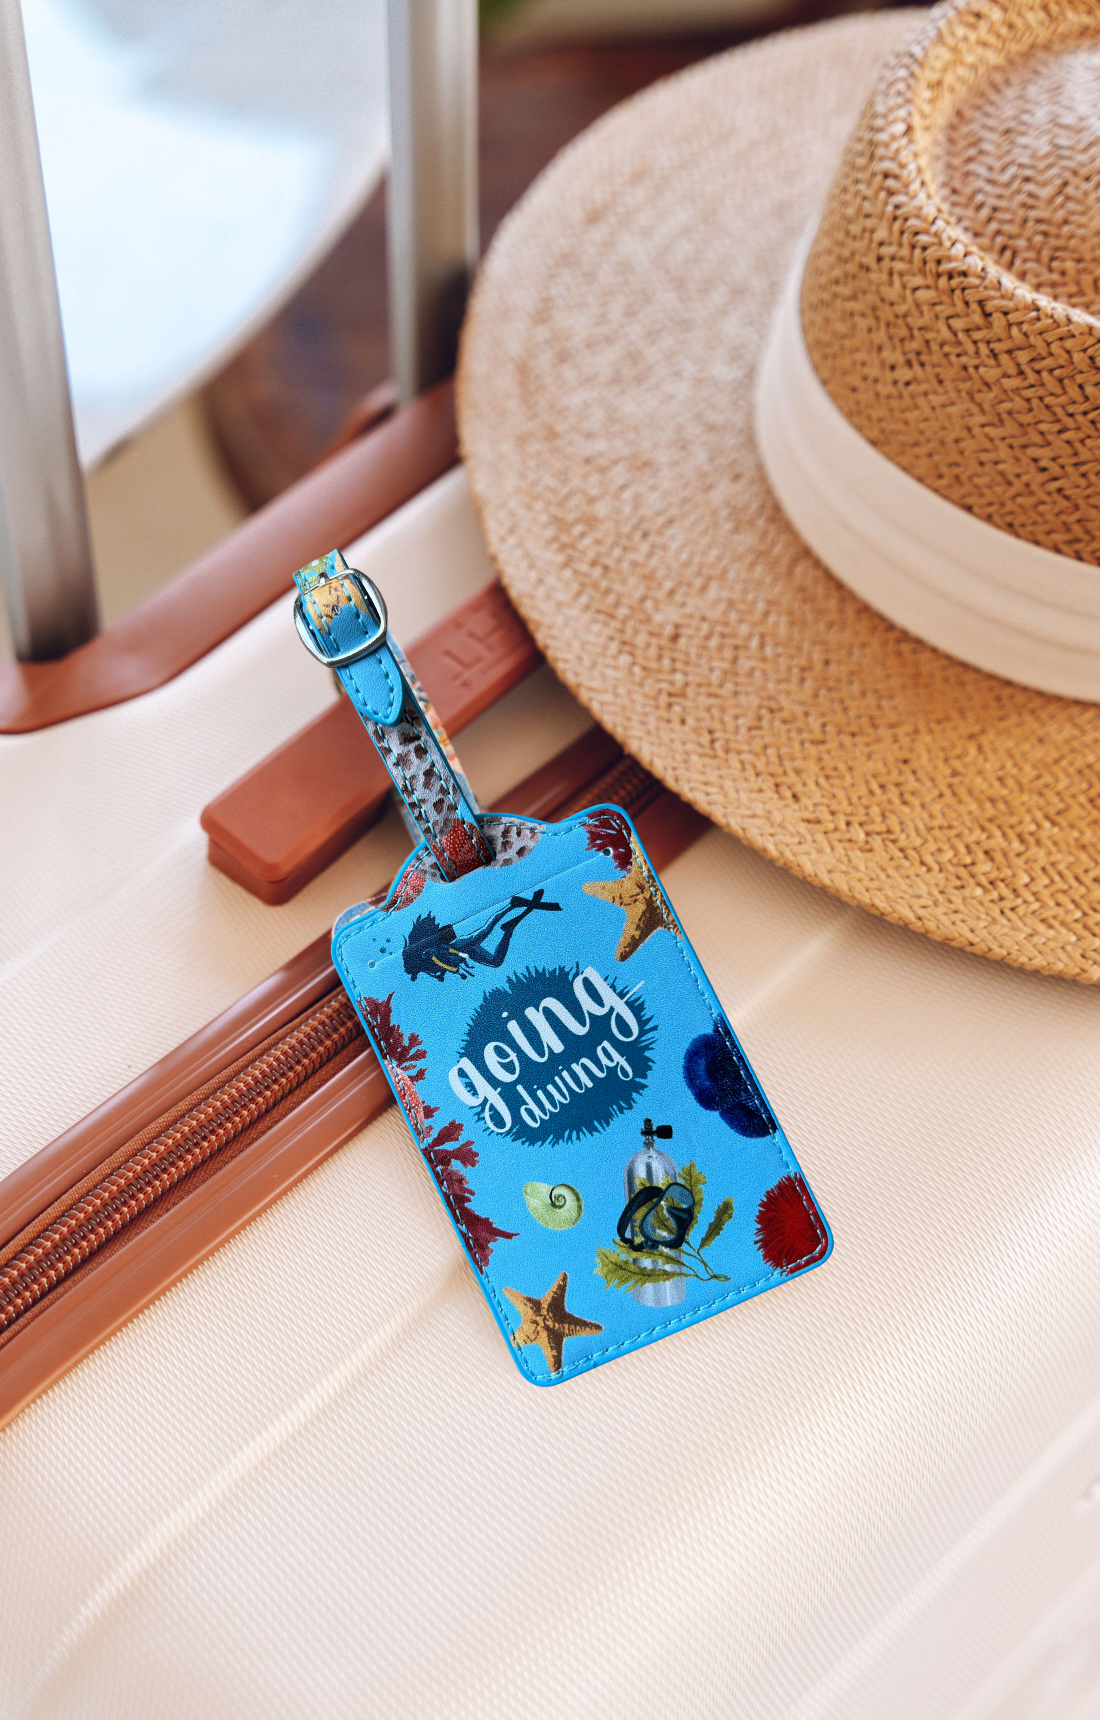 "Going Diving" Luggage Tag